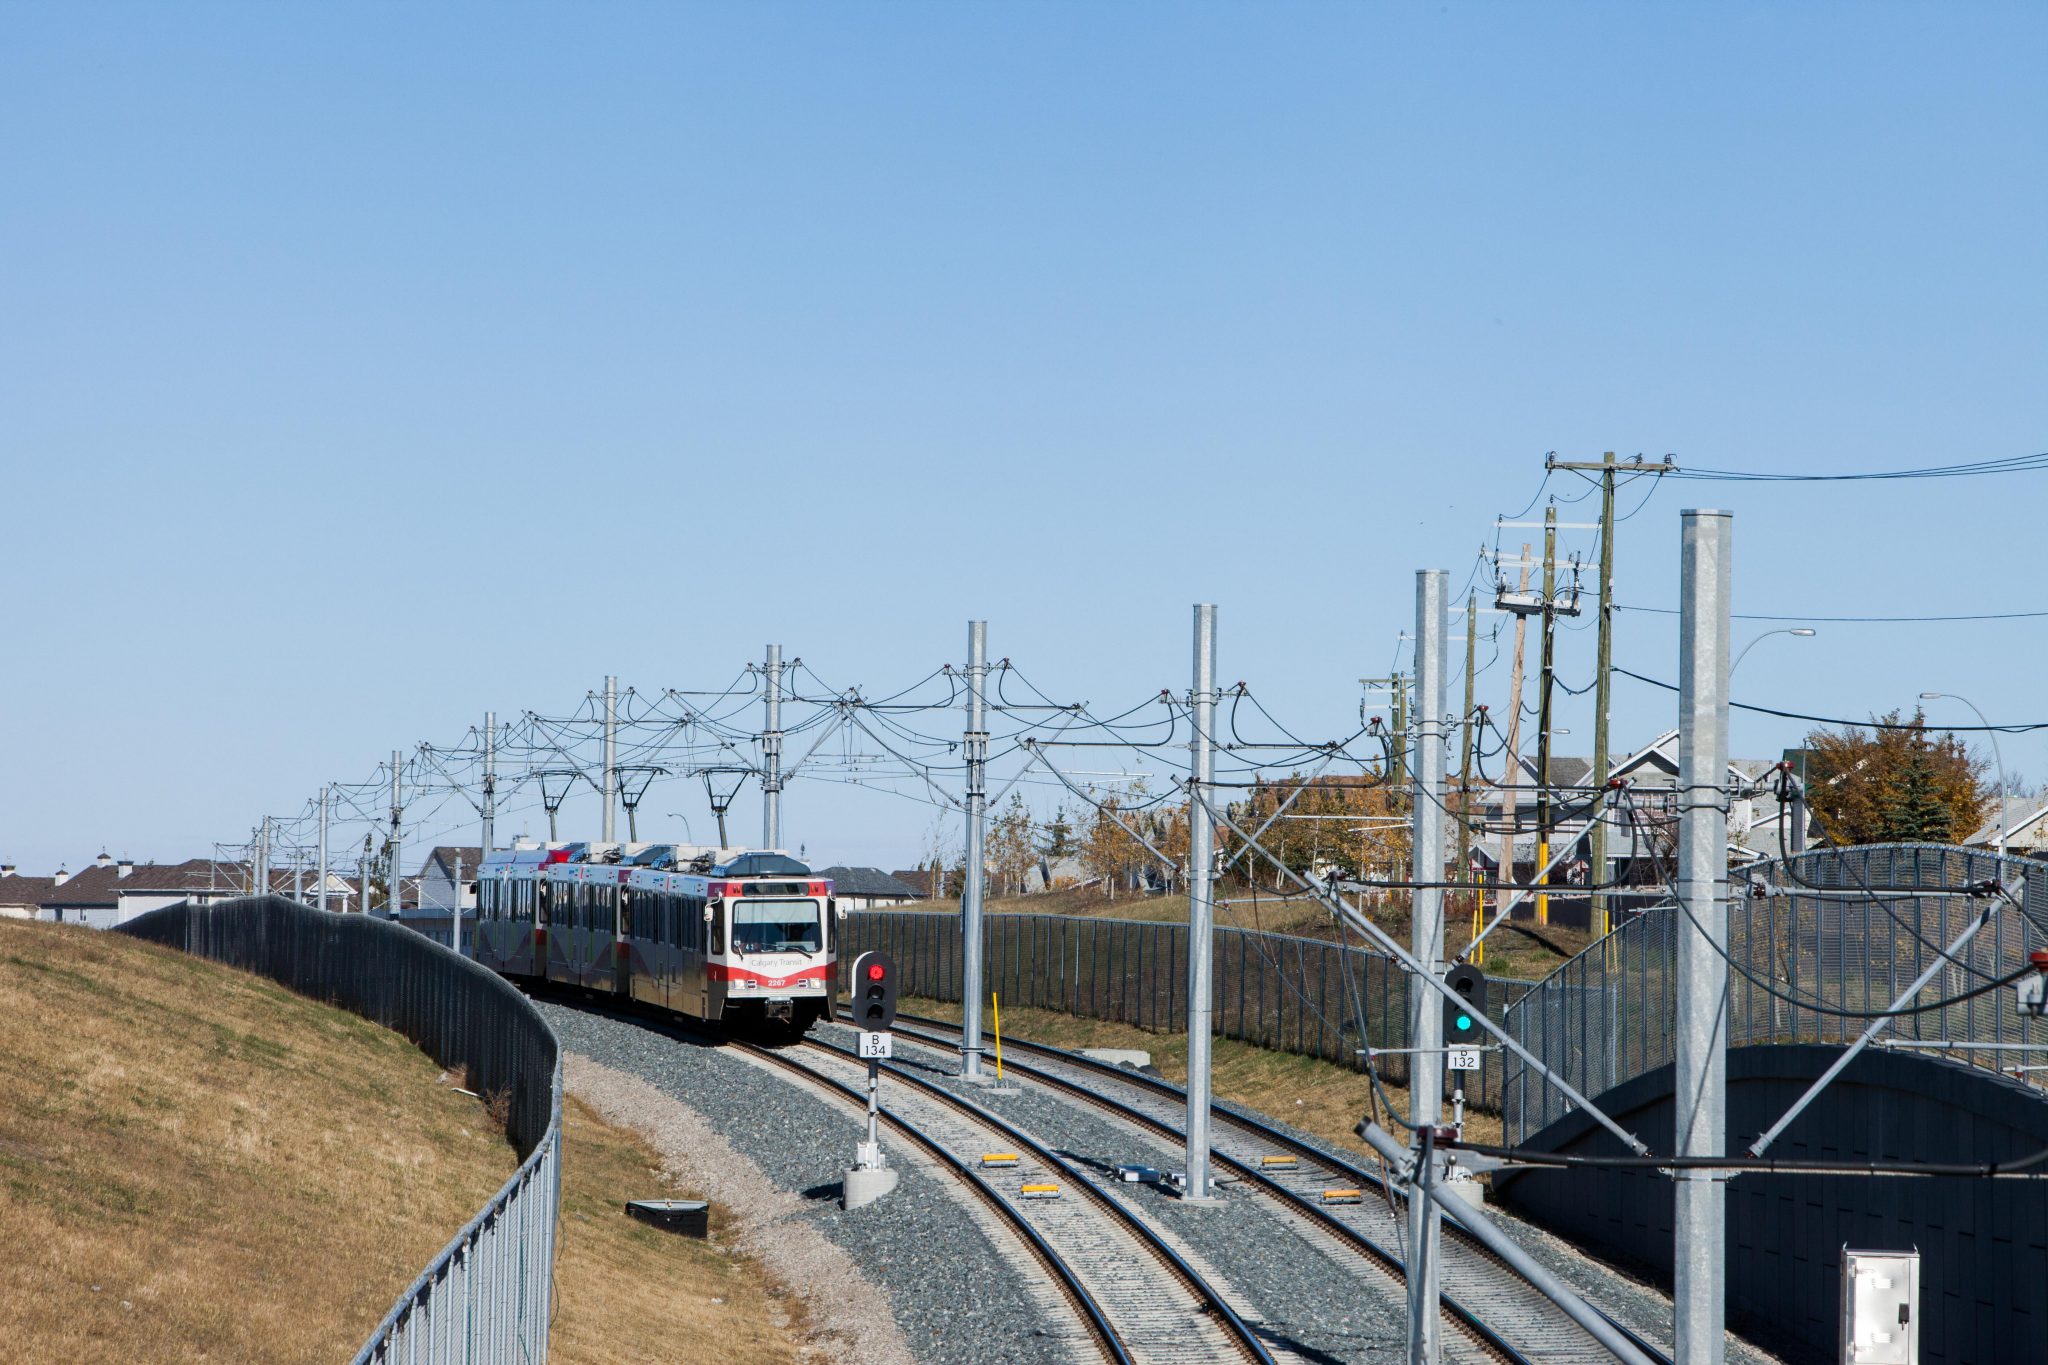 CTrain operates along the traction power system in Calgary under clear blue skies.